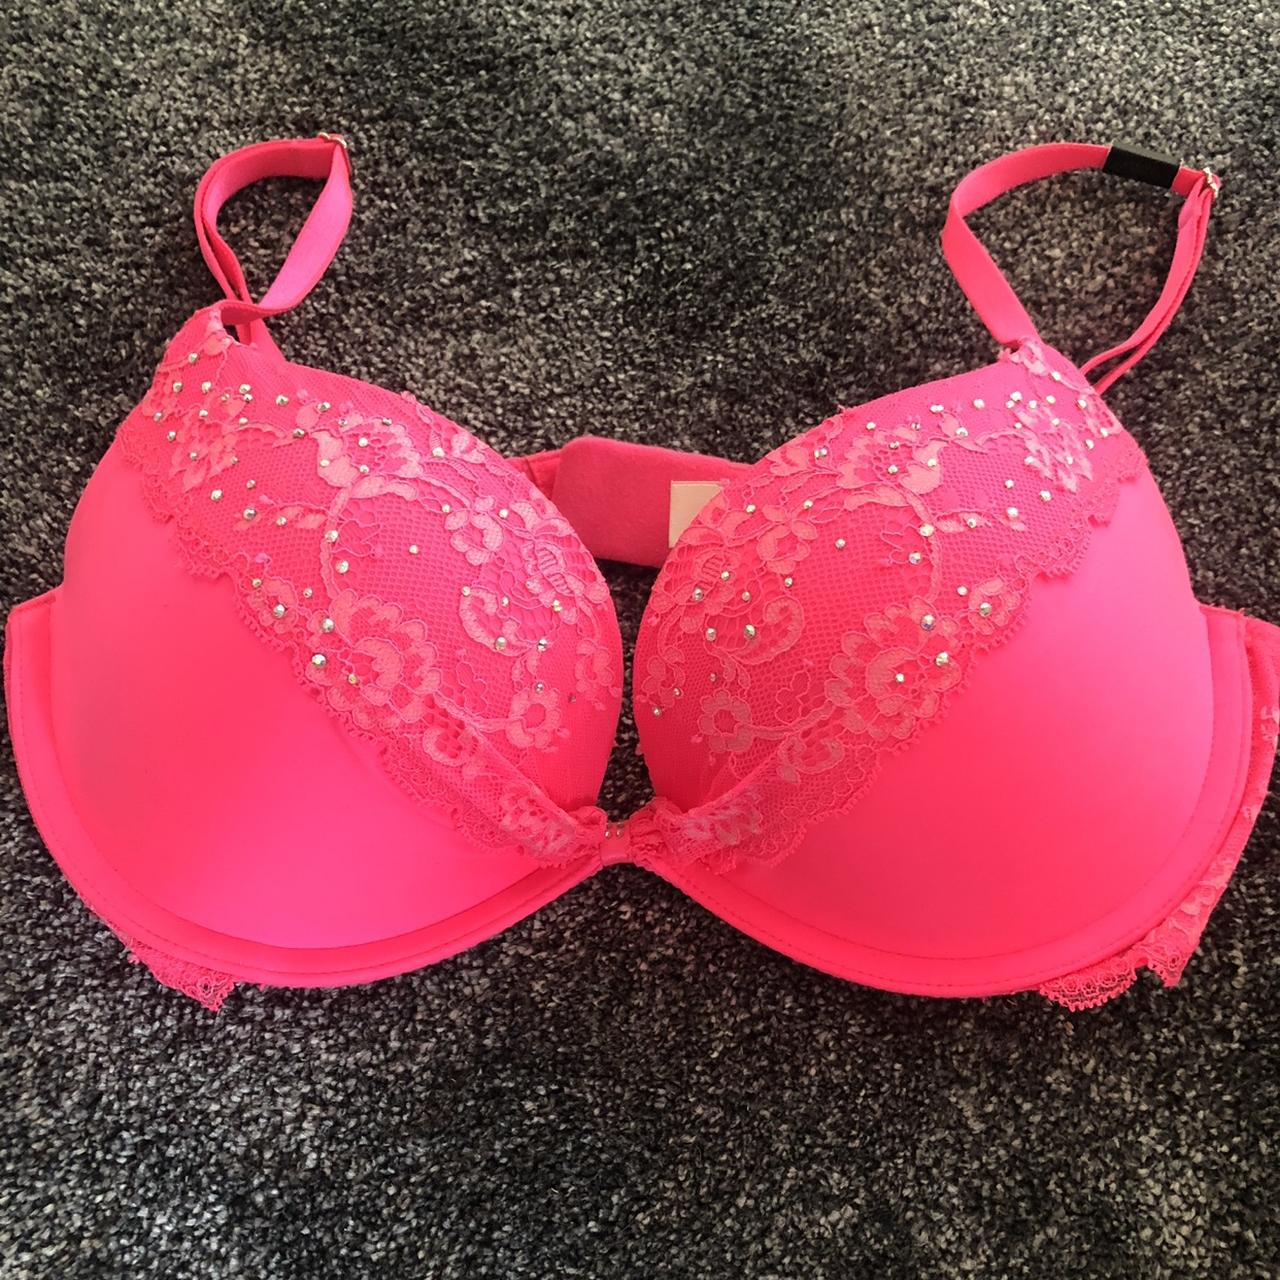 Php 195 sale! 36A Victoria's Secret Neon Pink Bra LAST STOCK!, Women's  Fashion, Dresses & Sets, Traditional & Ethnic wear on Carousell